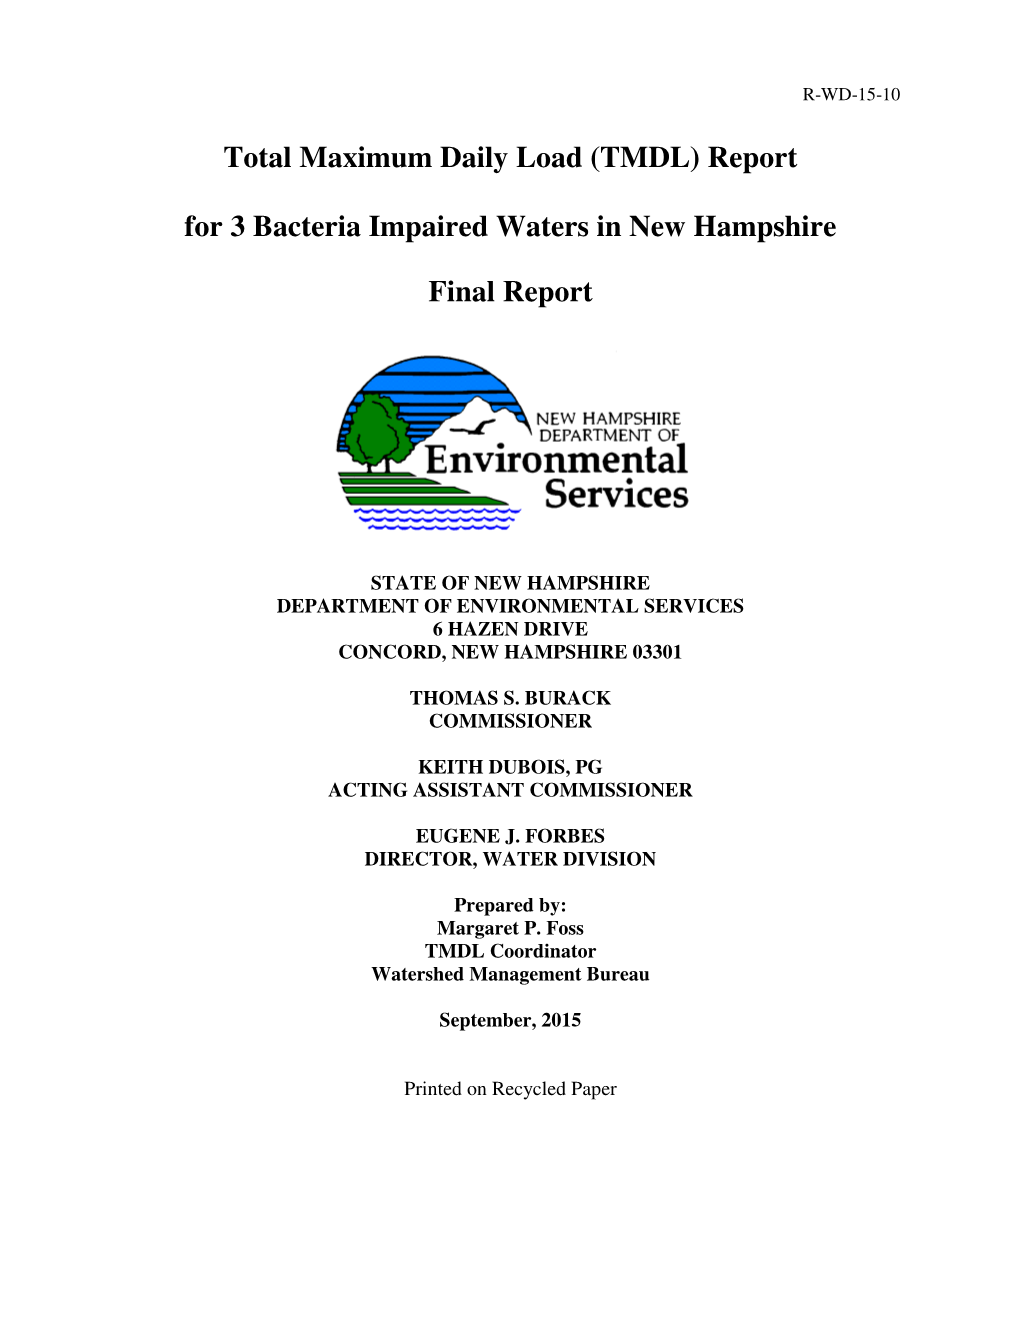 TMDL) Report for 3 Bacteria Impaired Waters in New Hampshire